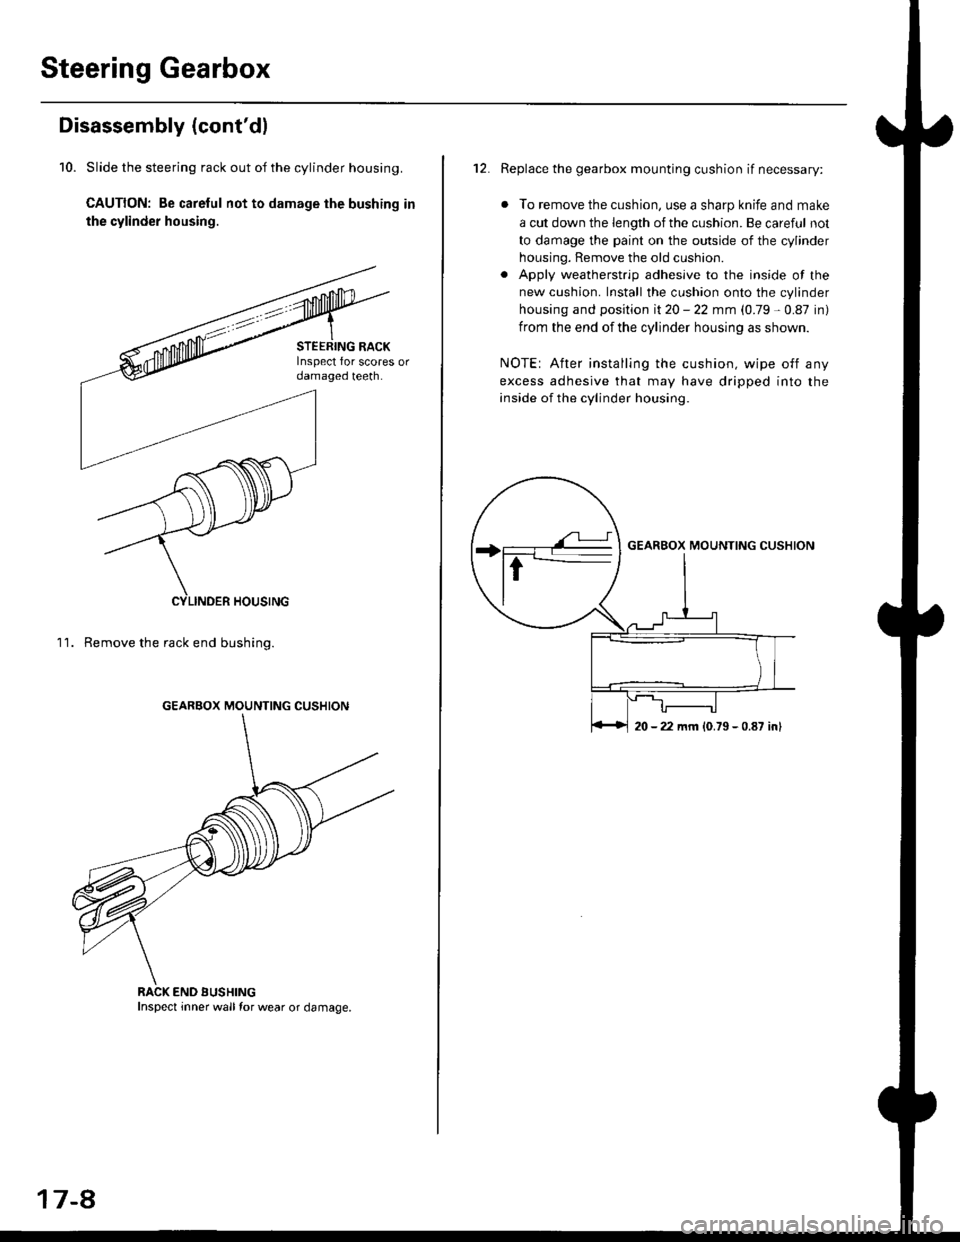 HONDA CIVIC 1998 6.G Workshop Manual Steering Gearbox
Disassembly (contdl
10. Slide the steering rack out of the cylinder housing.
CAUTION: Be carelul not to damage the bushing in
the cylinder housing.
11. Remove the rack end bushing.
G